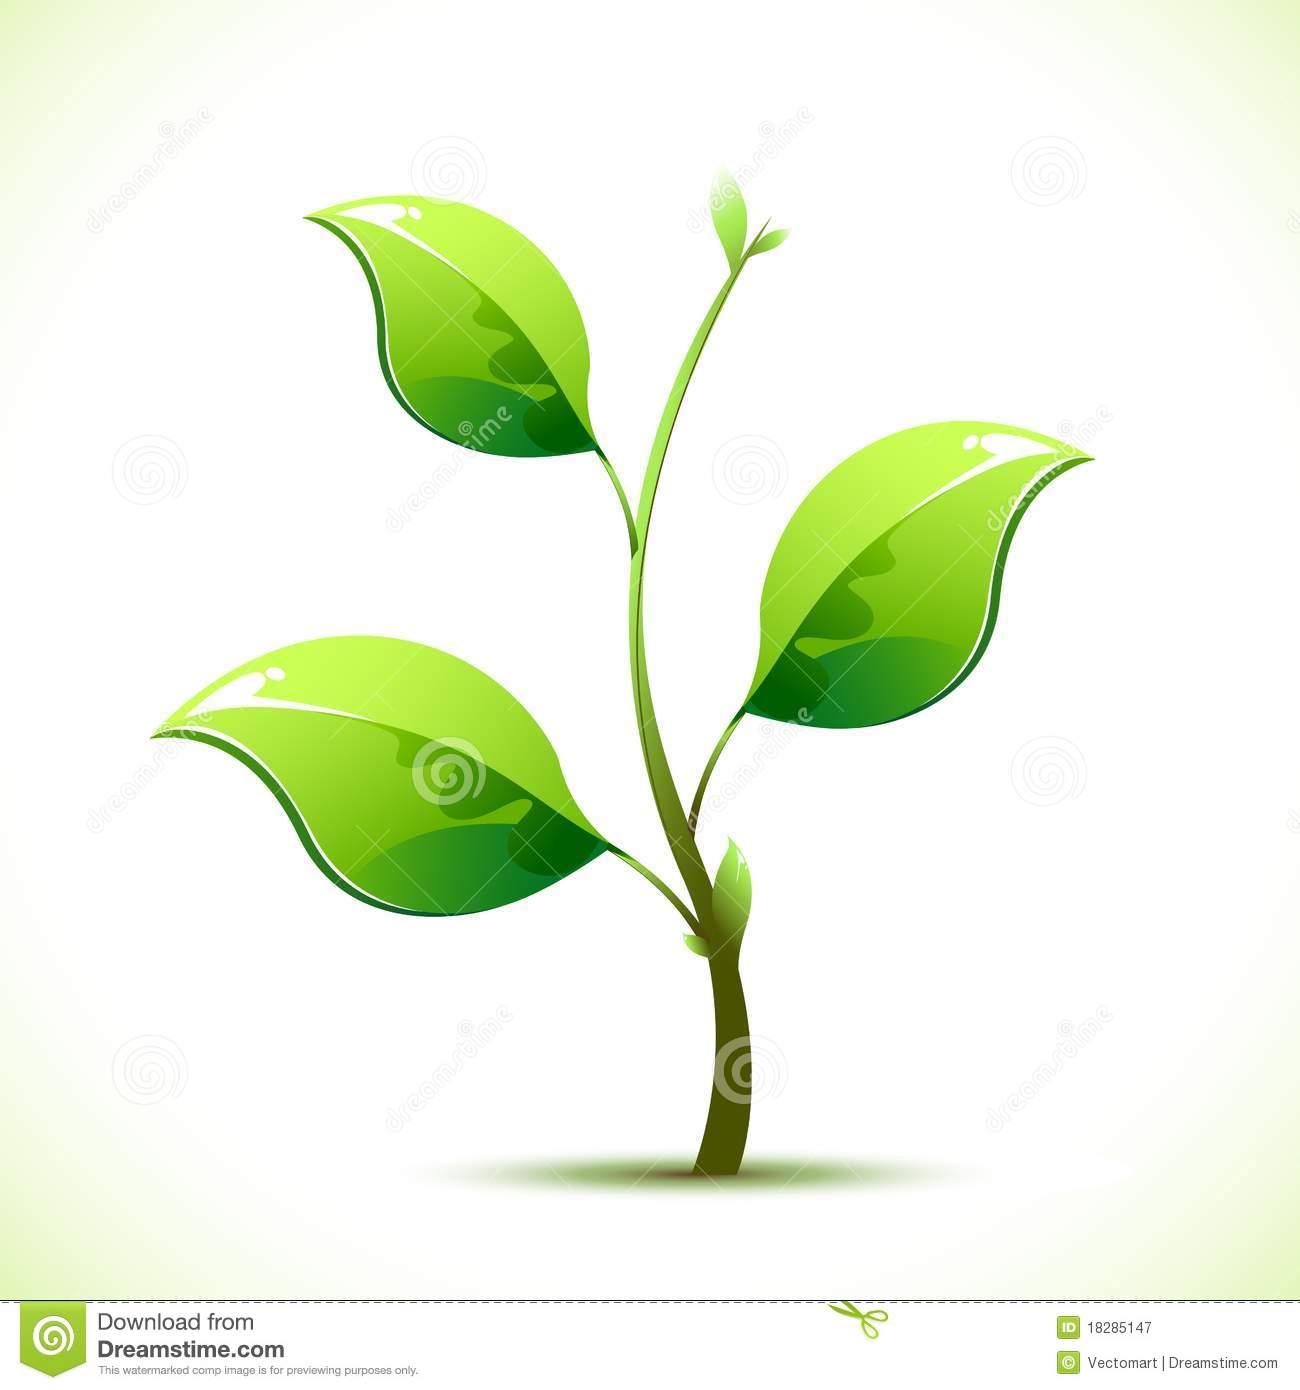 Illustration Of Plant Sapling Growing On Abstract Background